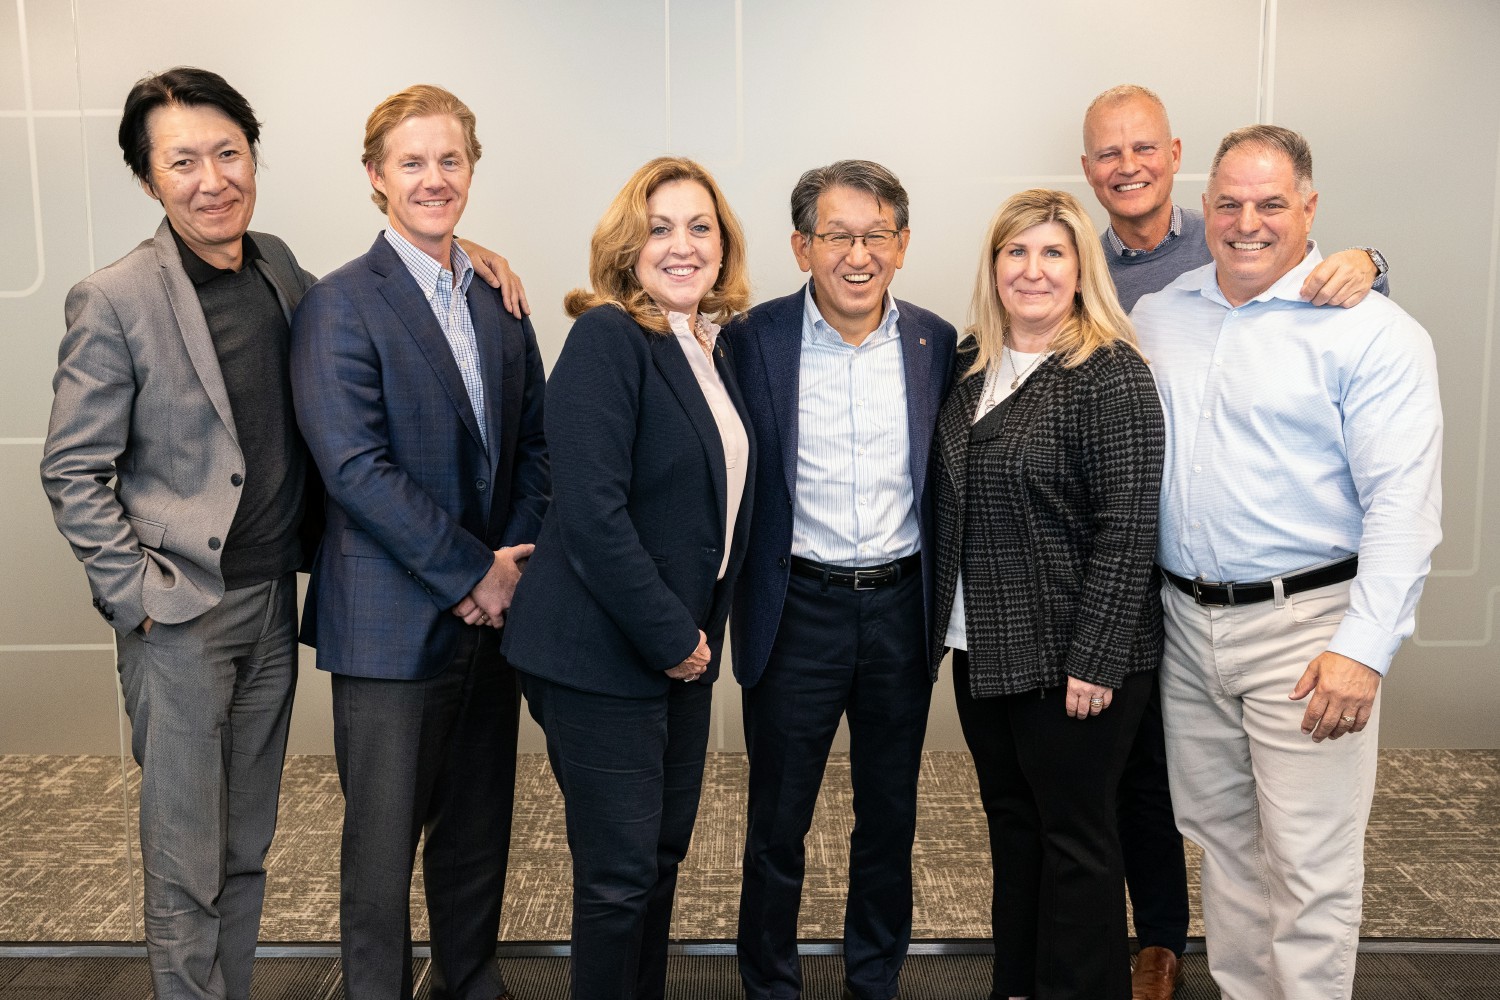 Members of the Ricoh Executive Management Team welcome global Chairman, Jake Yamashita, to Ricoh U.S. offices